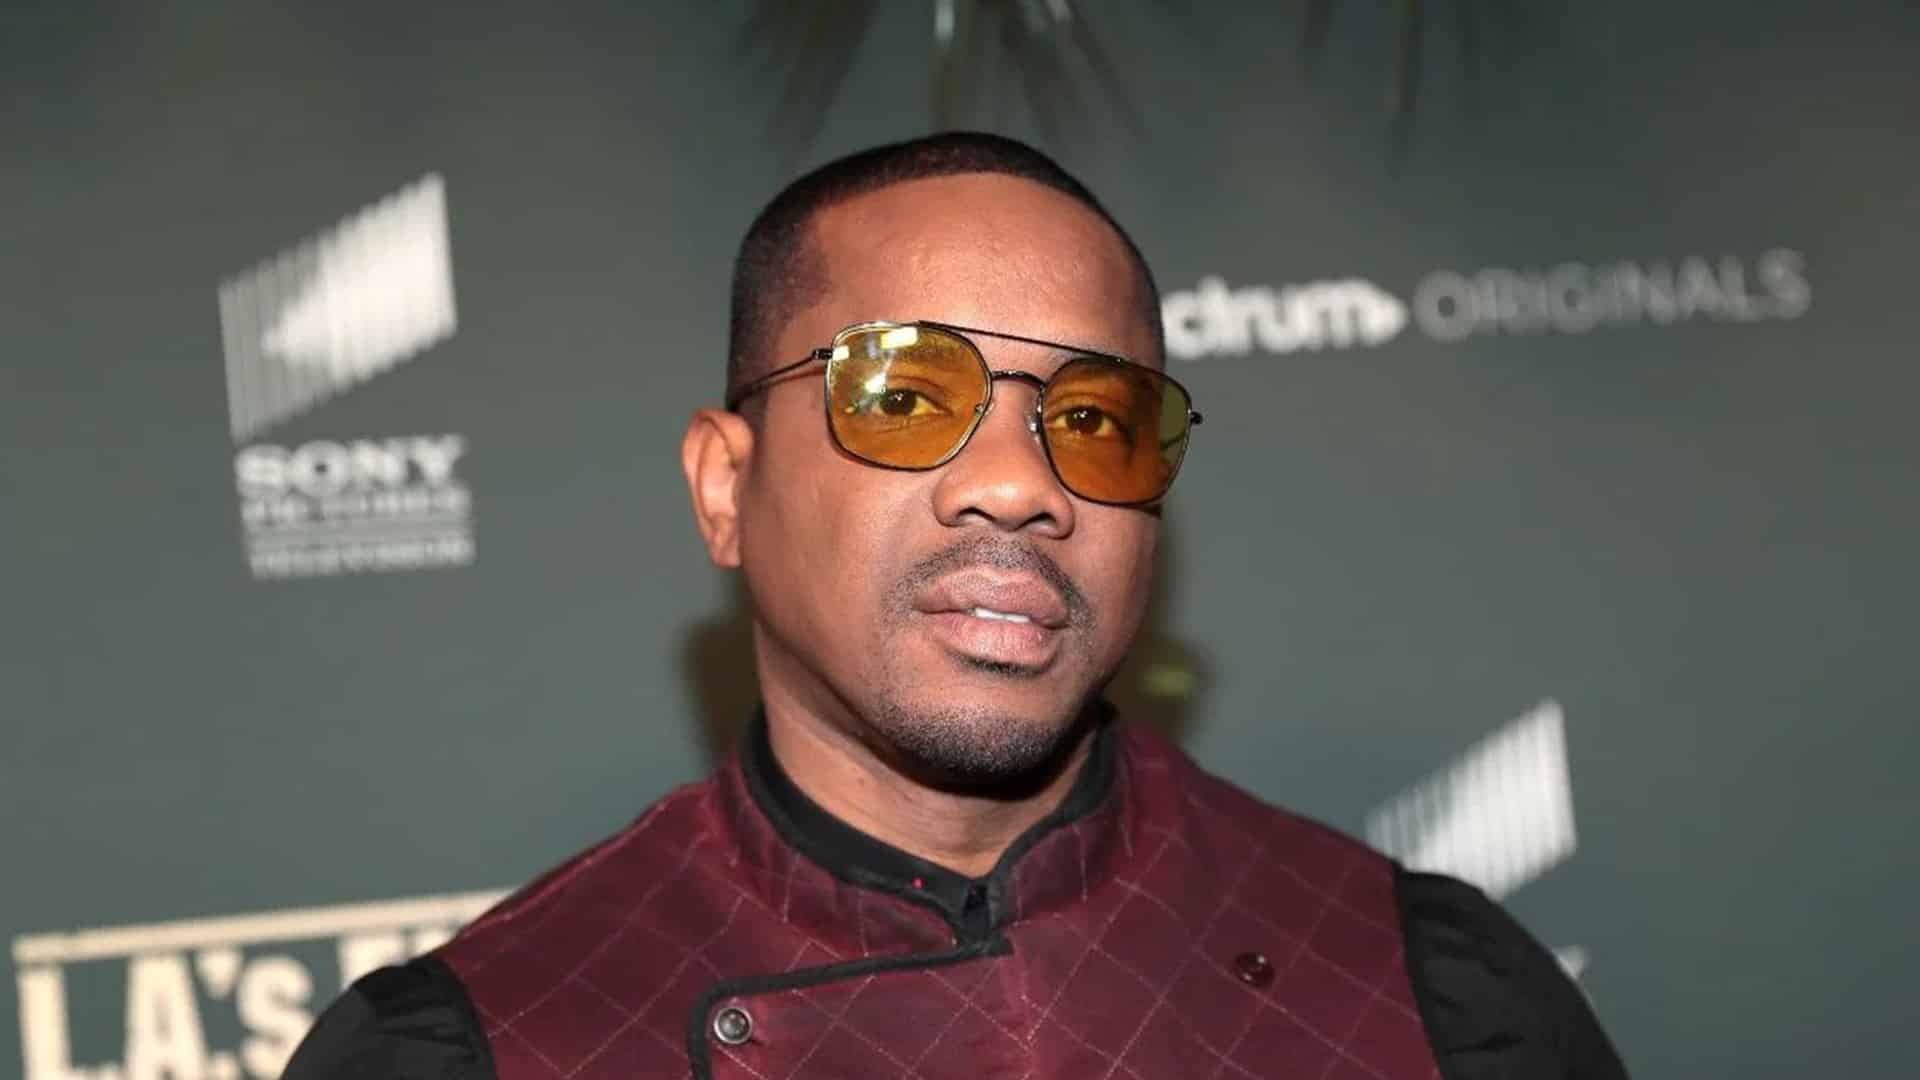 What is Duane Martin doing now? About Will Smith's Relationship